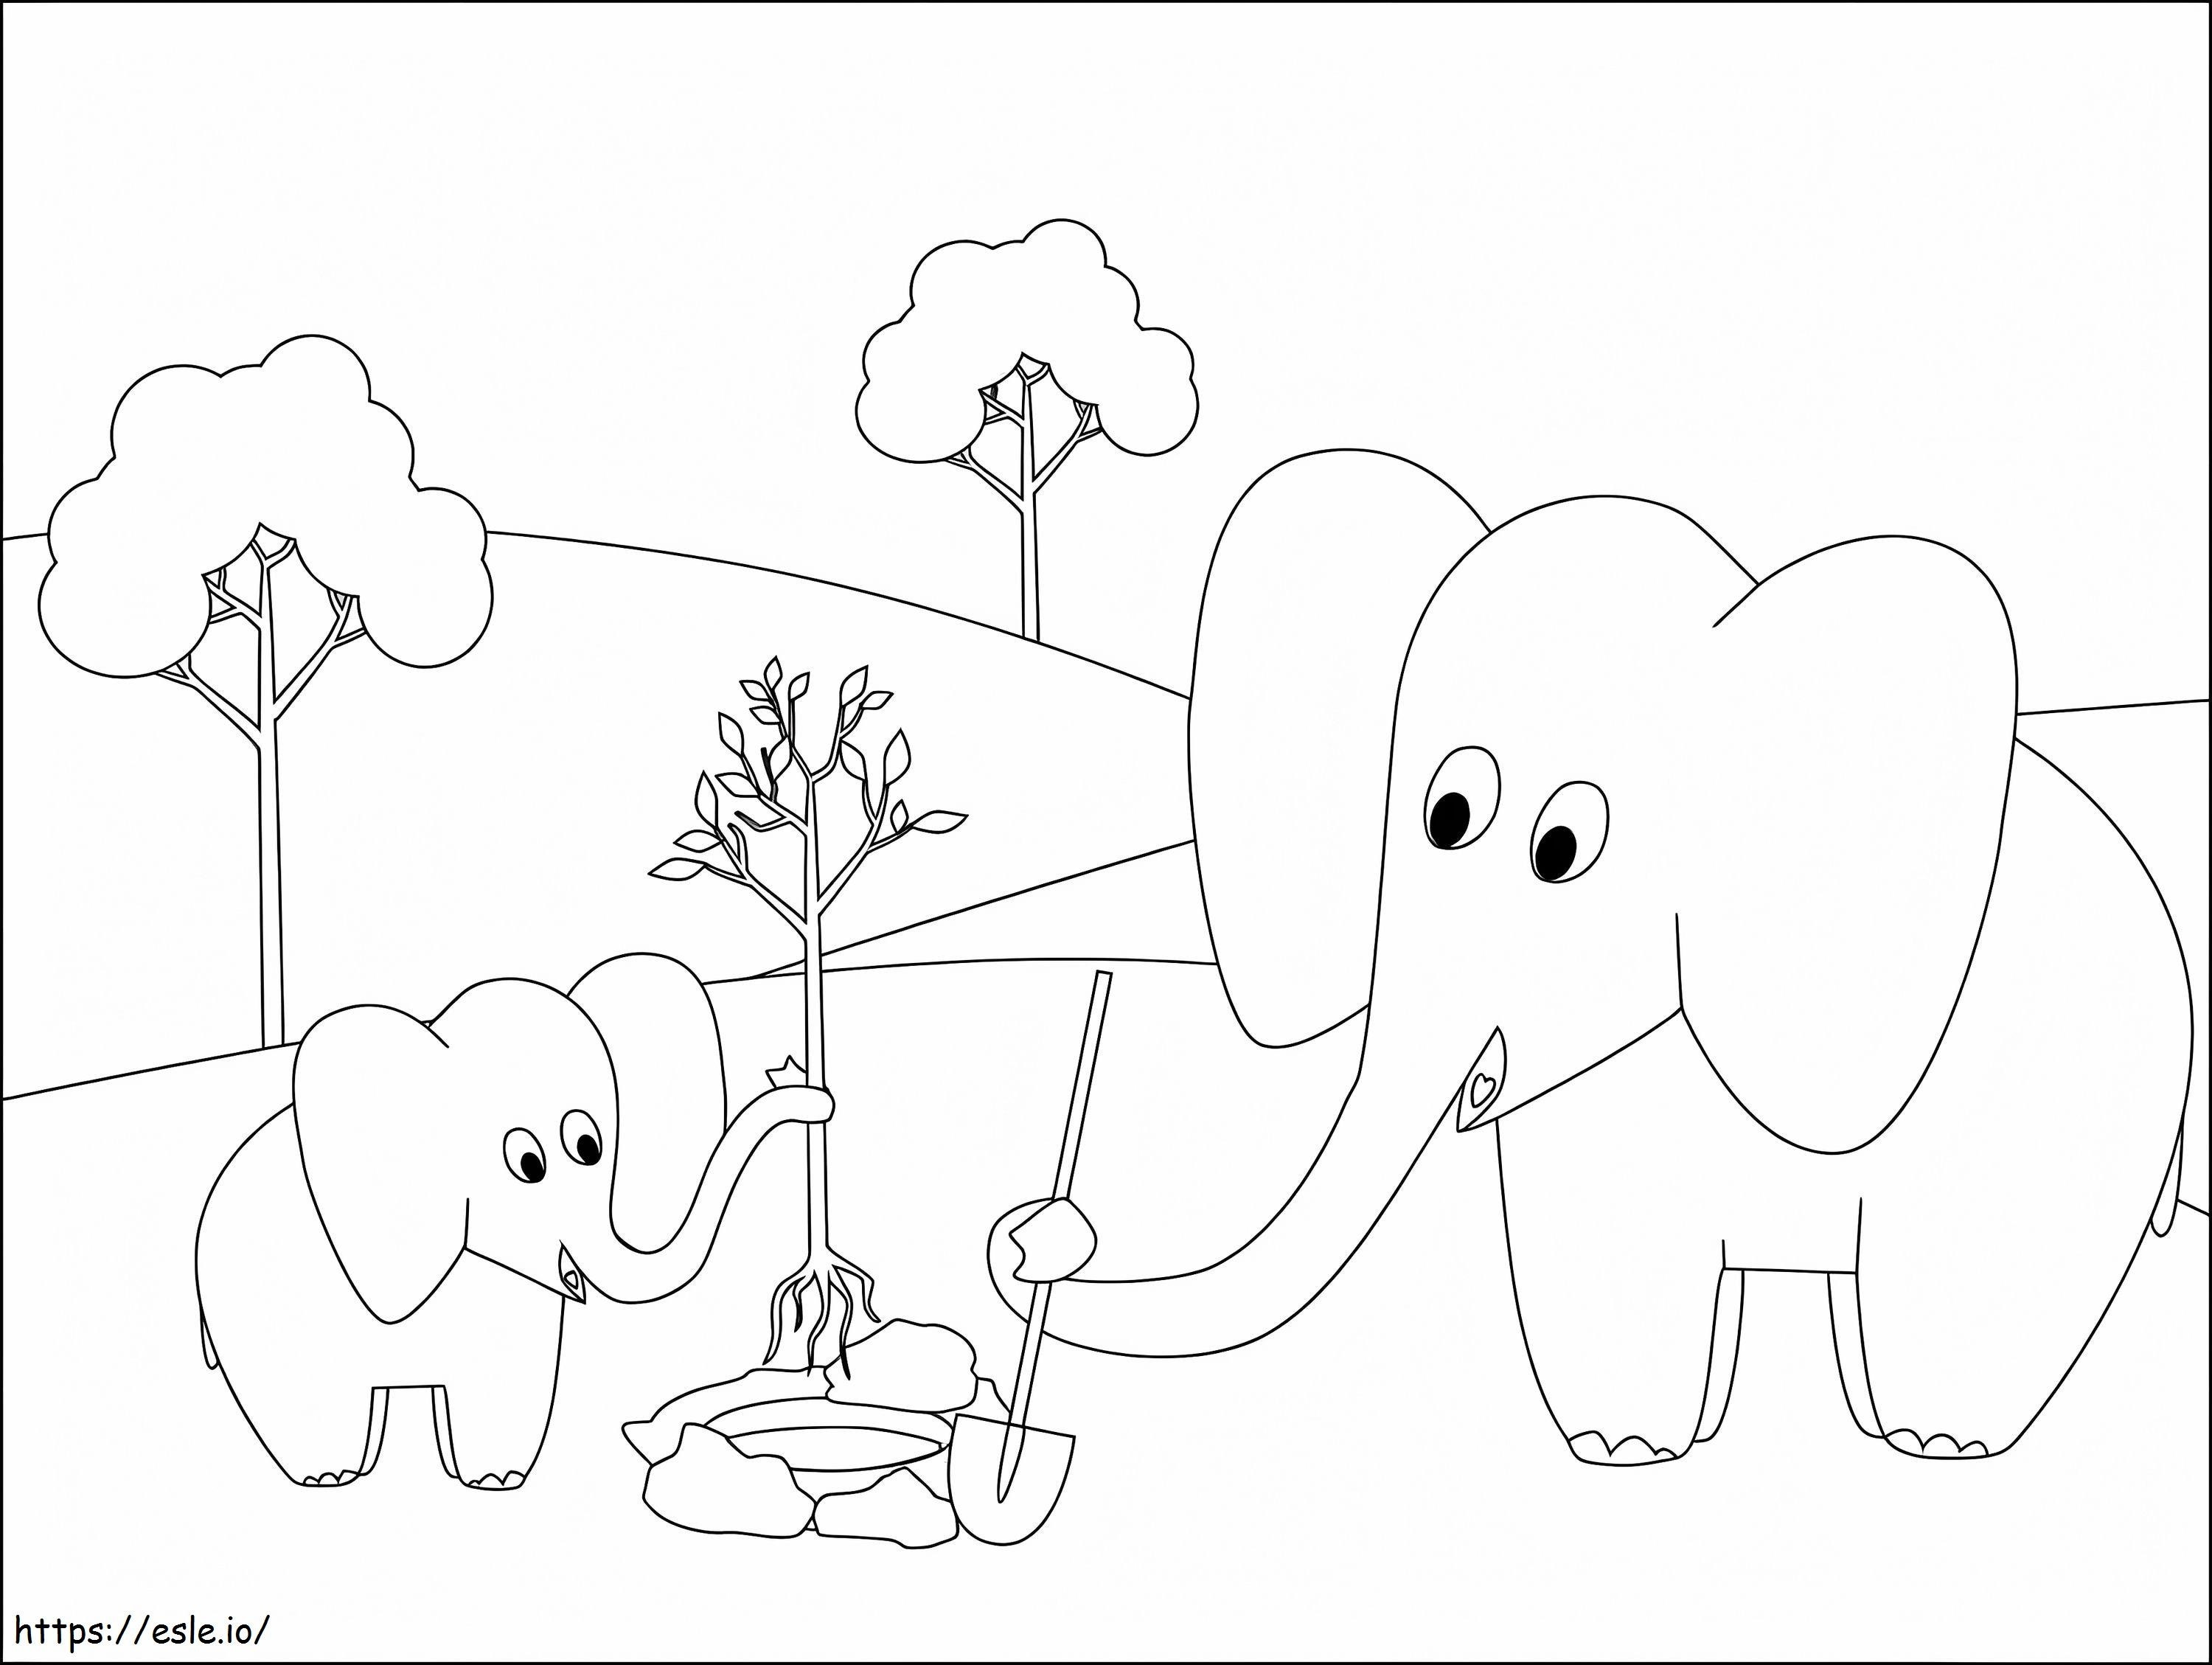 Elephant 12 coloring page